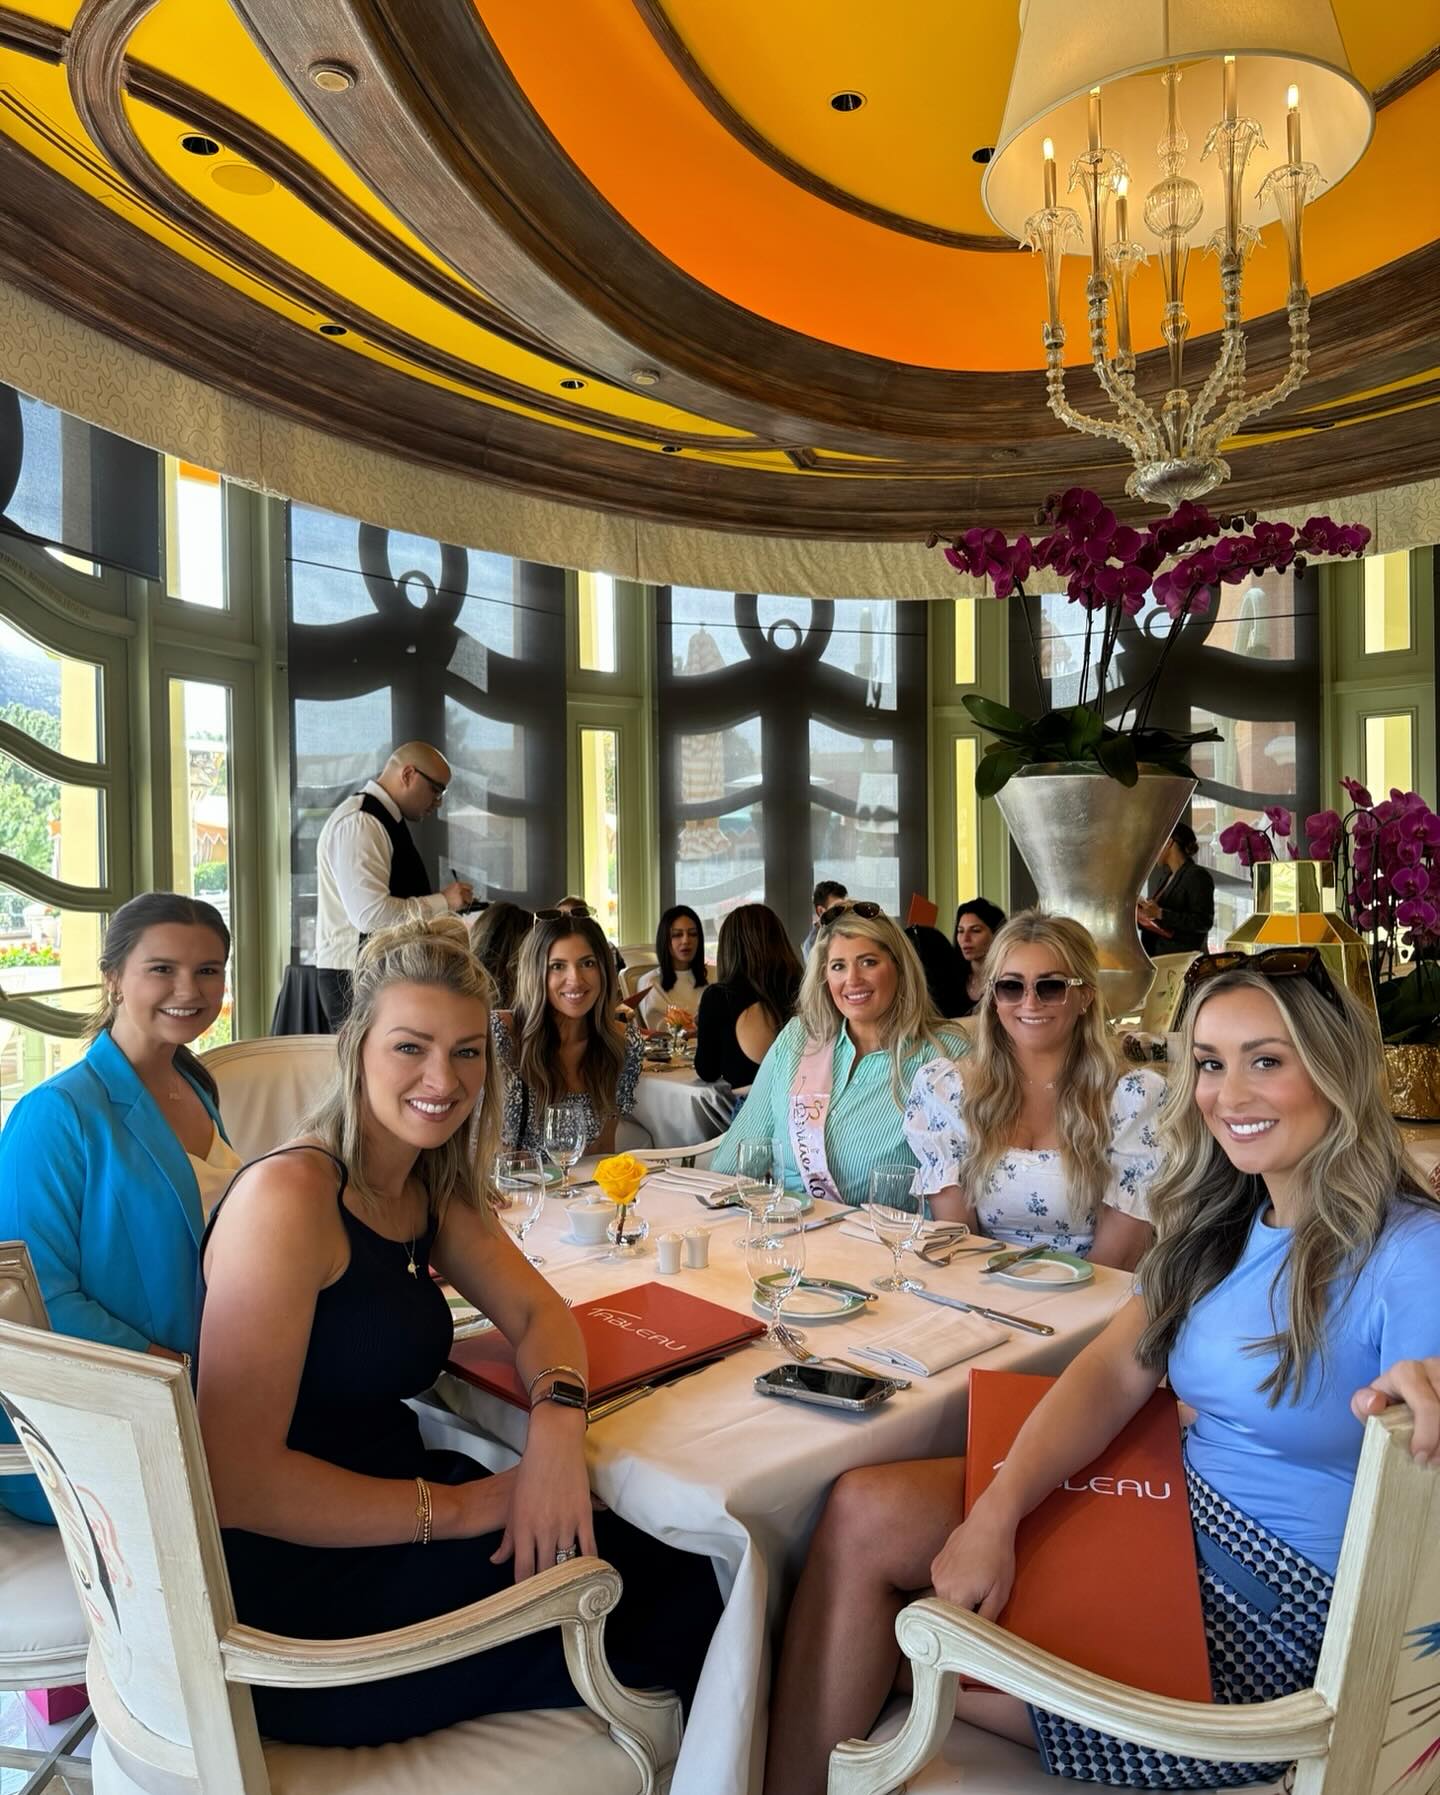 It takes an extra special reason to get this anxious group of moms away from our kiddos for even a couple hours, but this beautiful bride-to-be (and the Magic Mike Live show🤤) was definitely worth taking a girls trip to Vegas to celebrate🎉👰🏼‍♀️🎰🎲